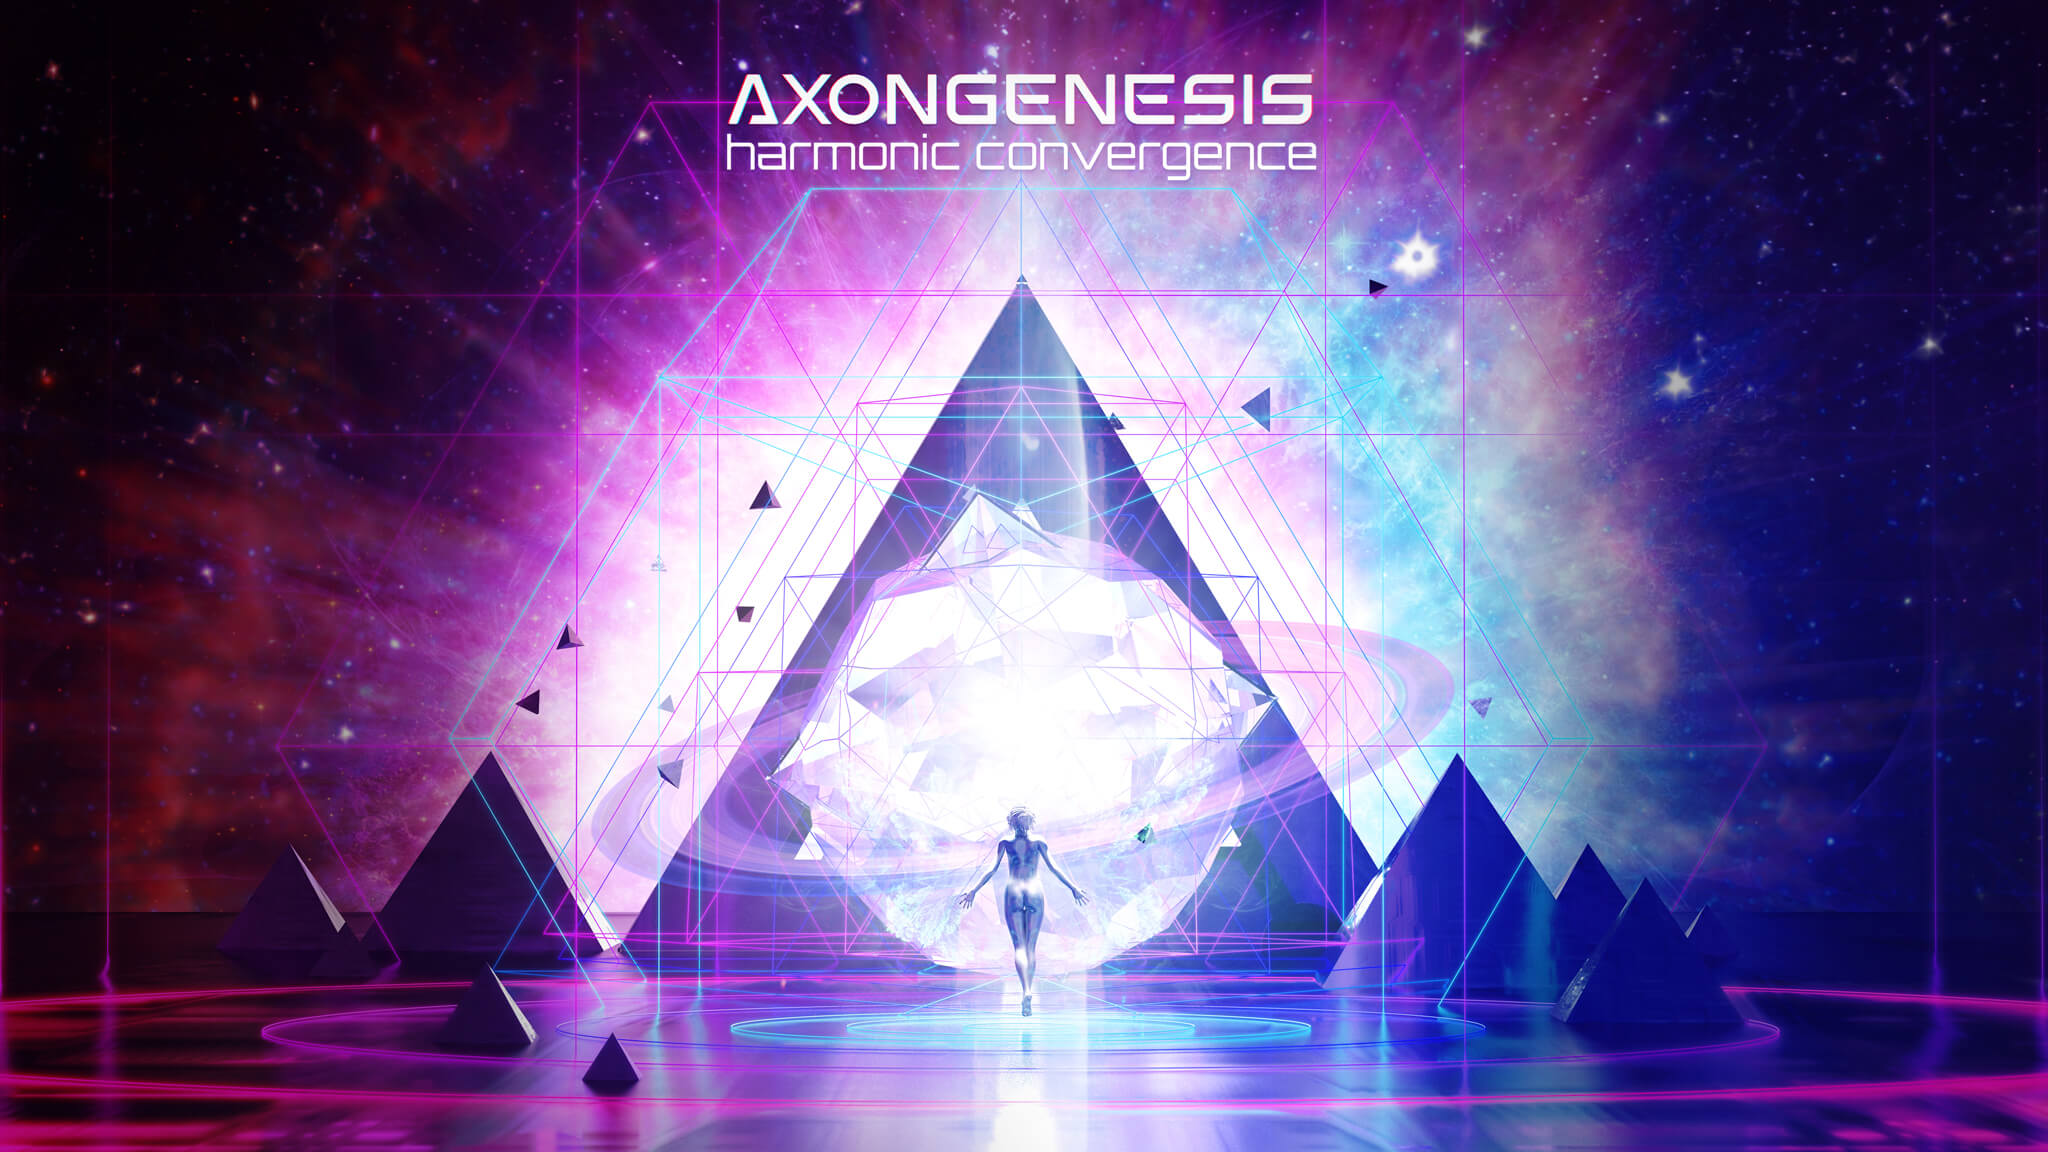 Harmonic Convergence Music and Cover Art by Axon Genesis